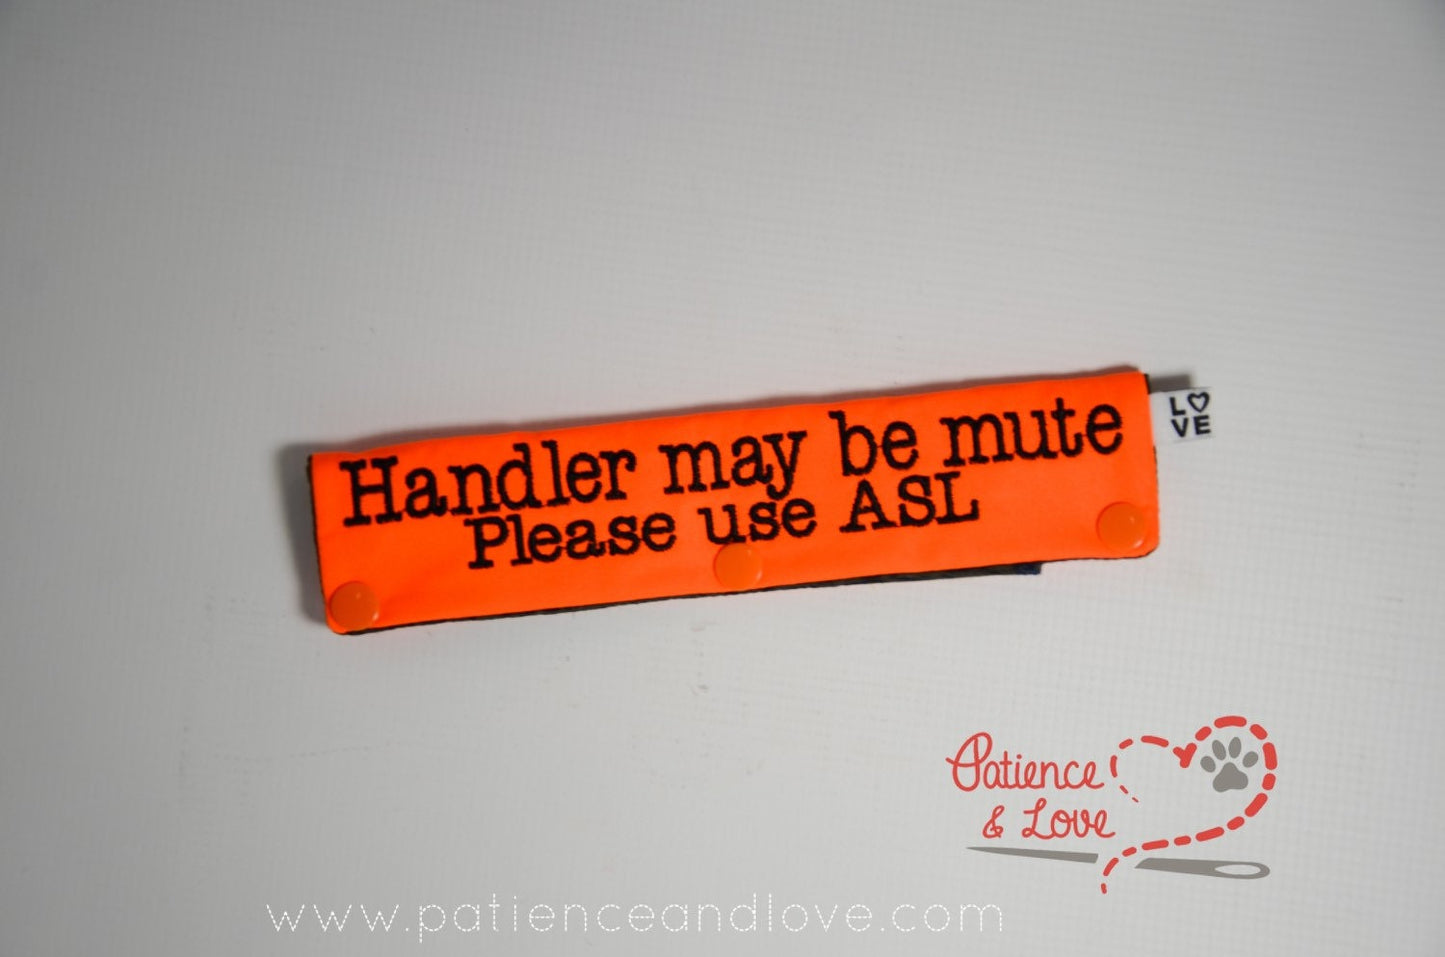 Handler may be mute Please use ASL, 2 lines of text, Leash Sleeve